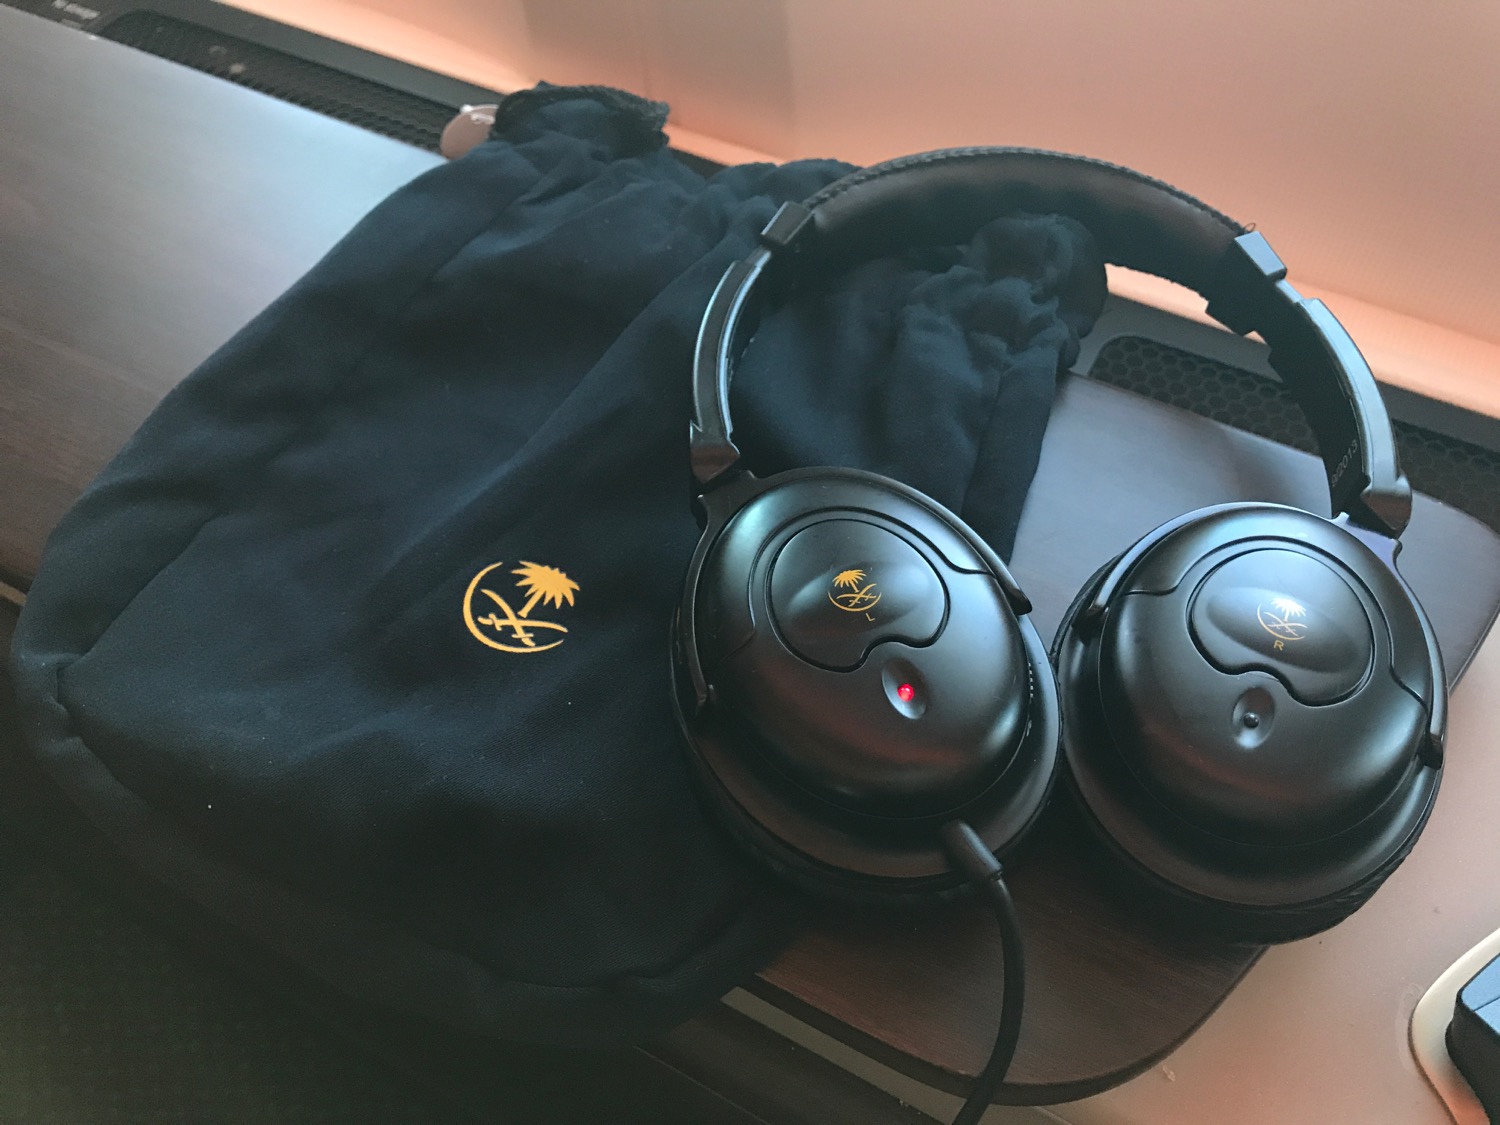 Headphones are in the black bag